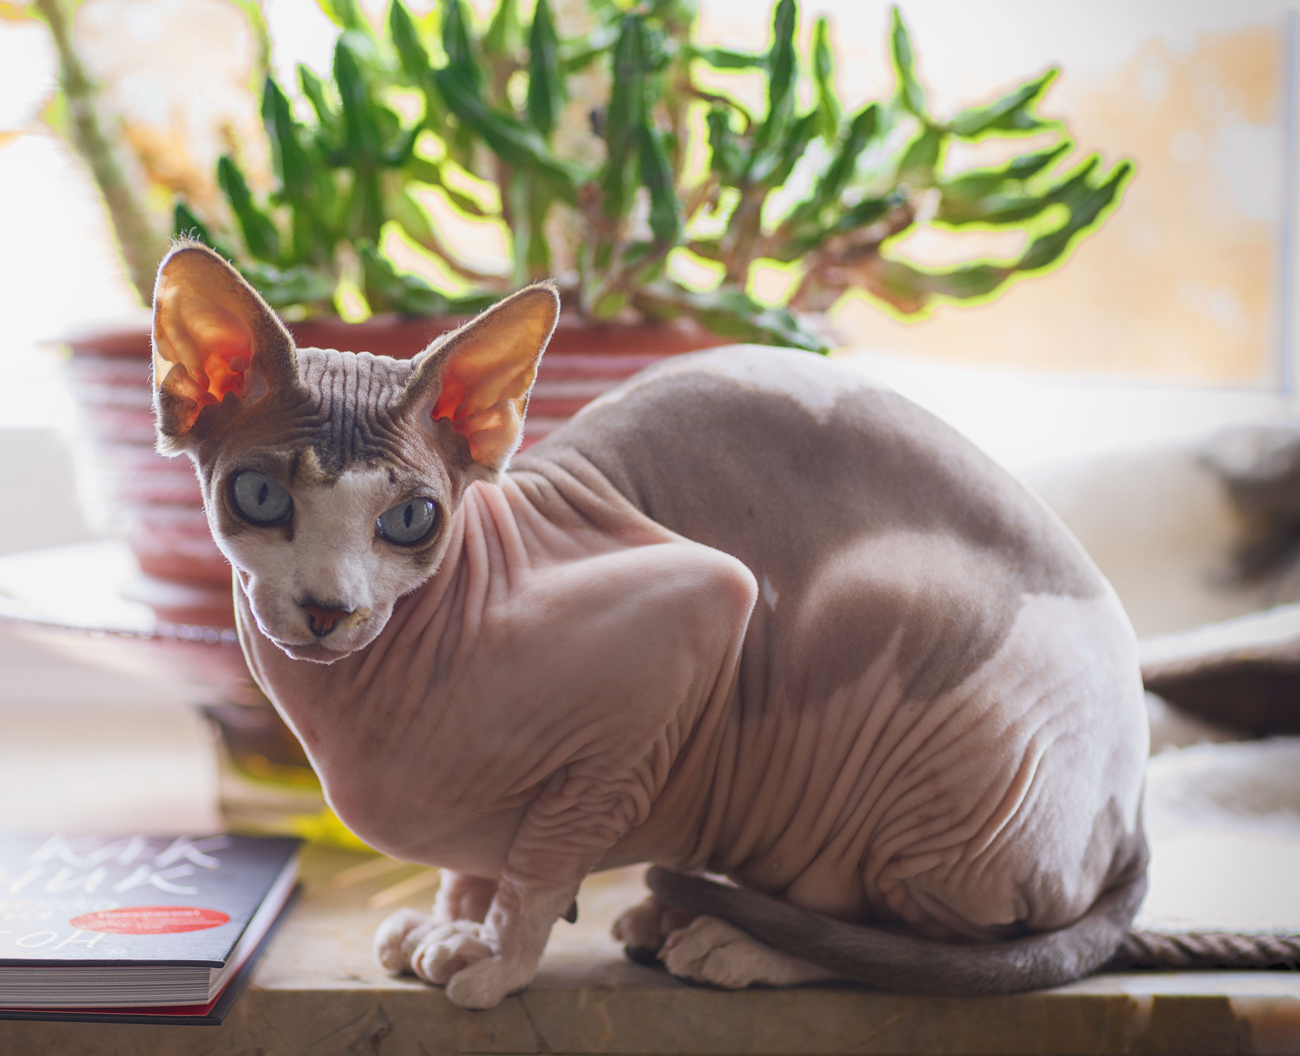 A Sphynx hairless cat sitting on a desk